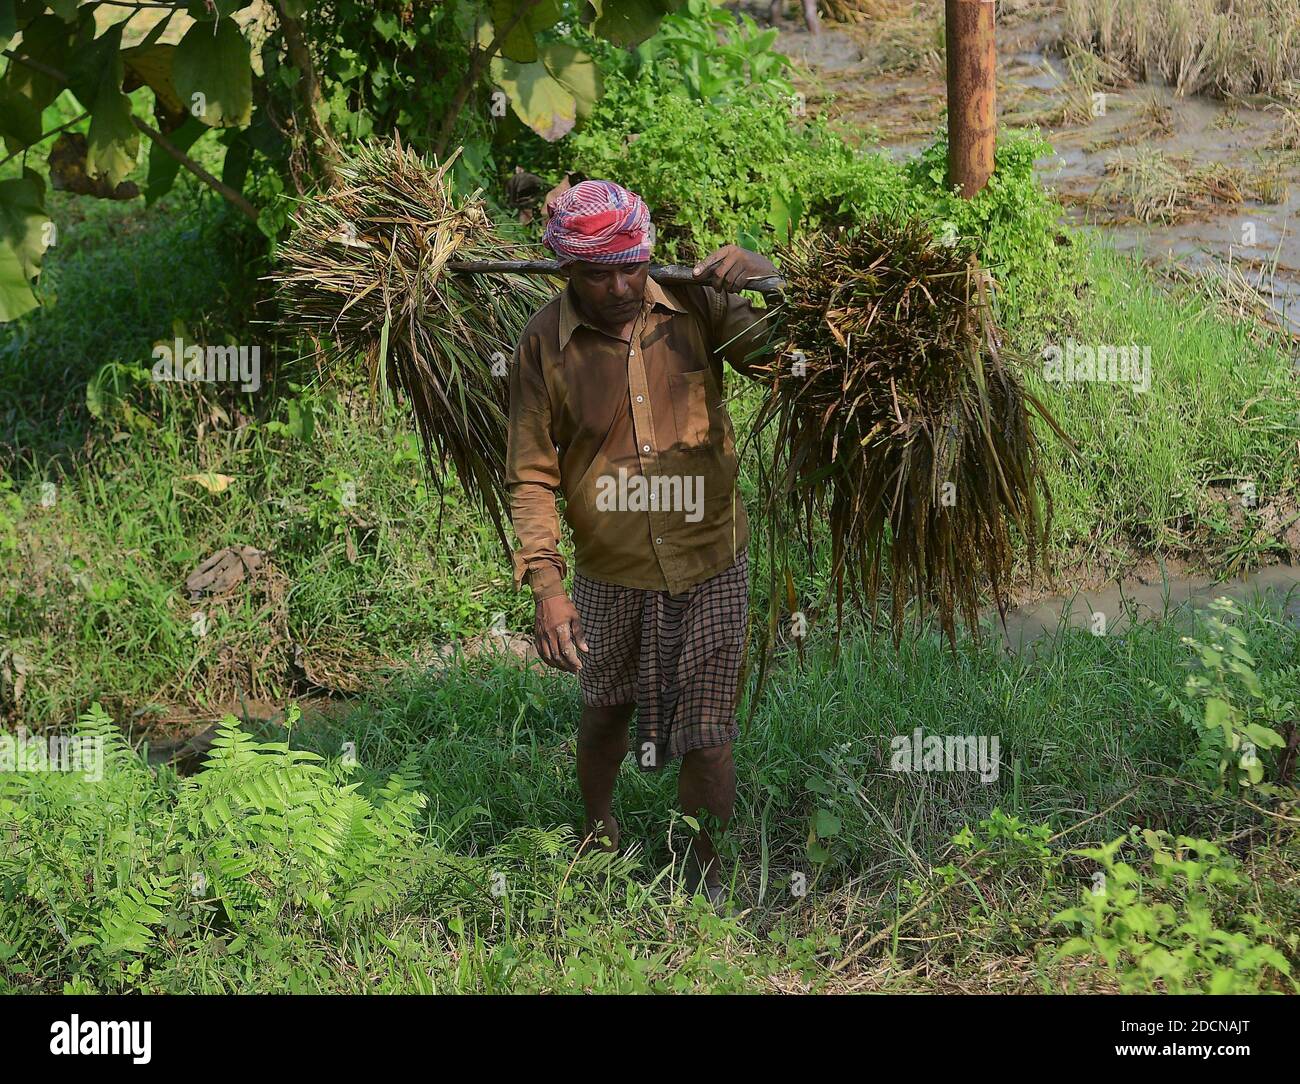 Farmers working hard in the field. Planting, watering, fertilizing and removing weeds that compete with the crops. Agartala, Tripura, India. Stock Photo